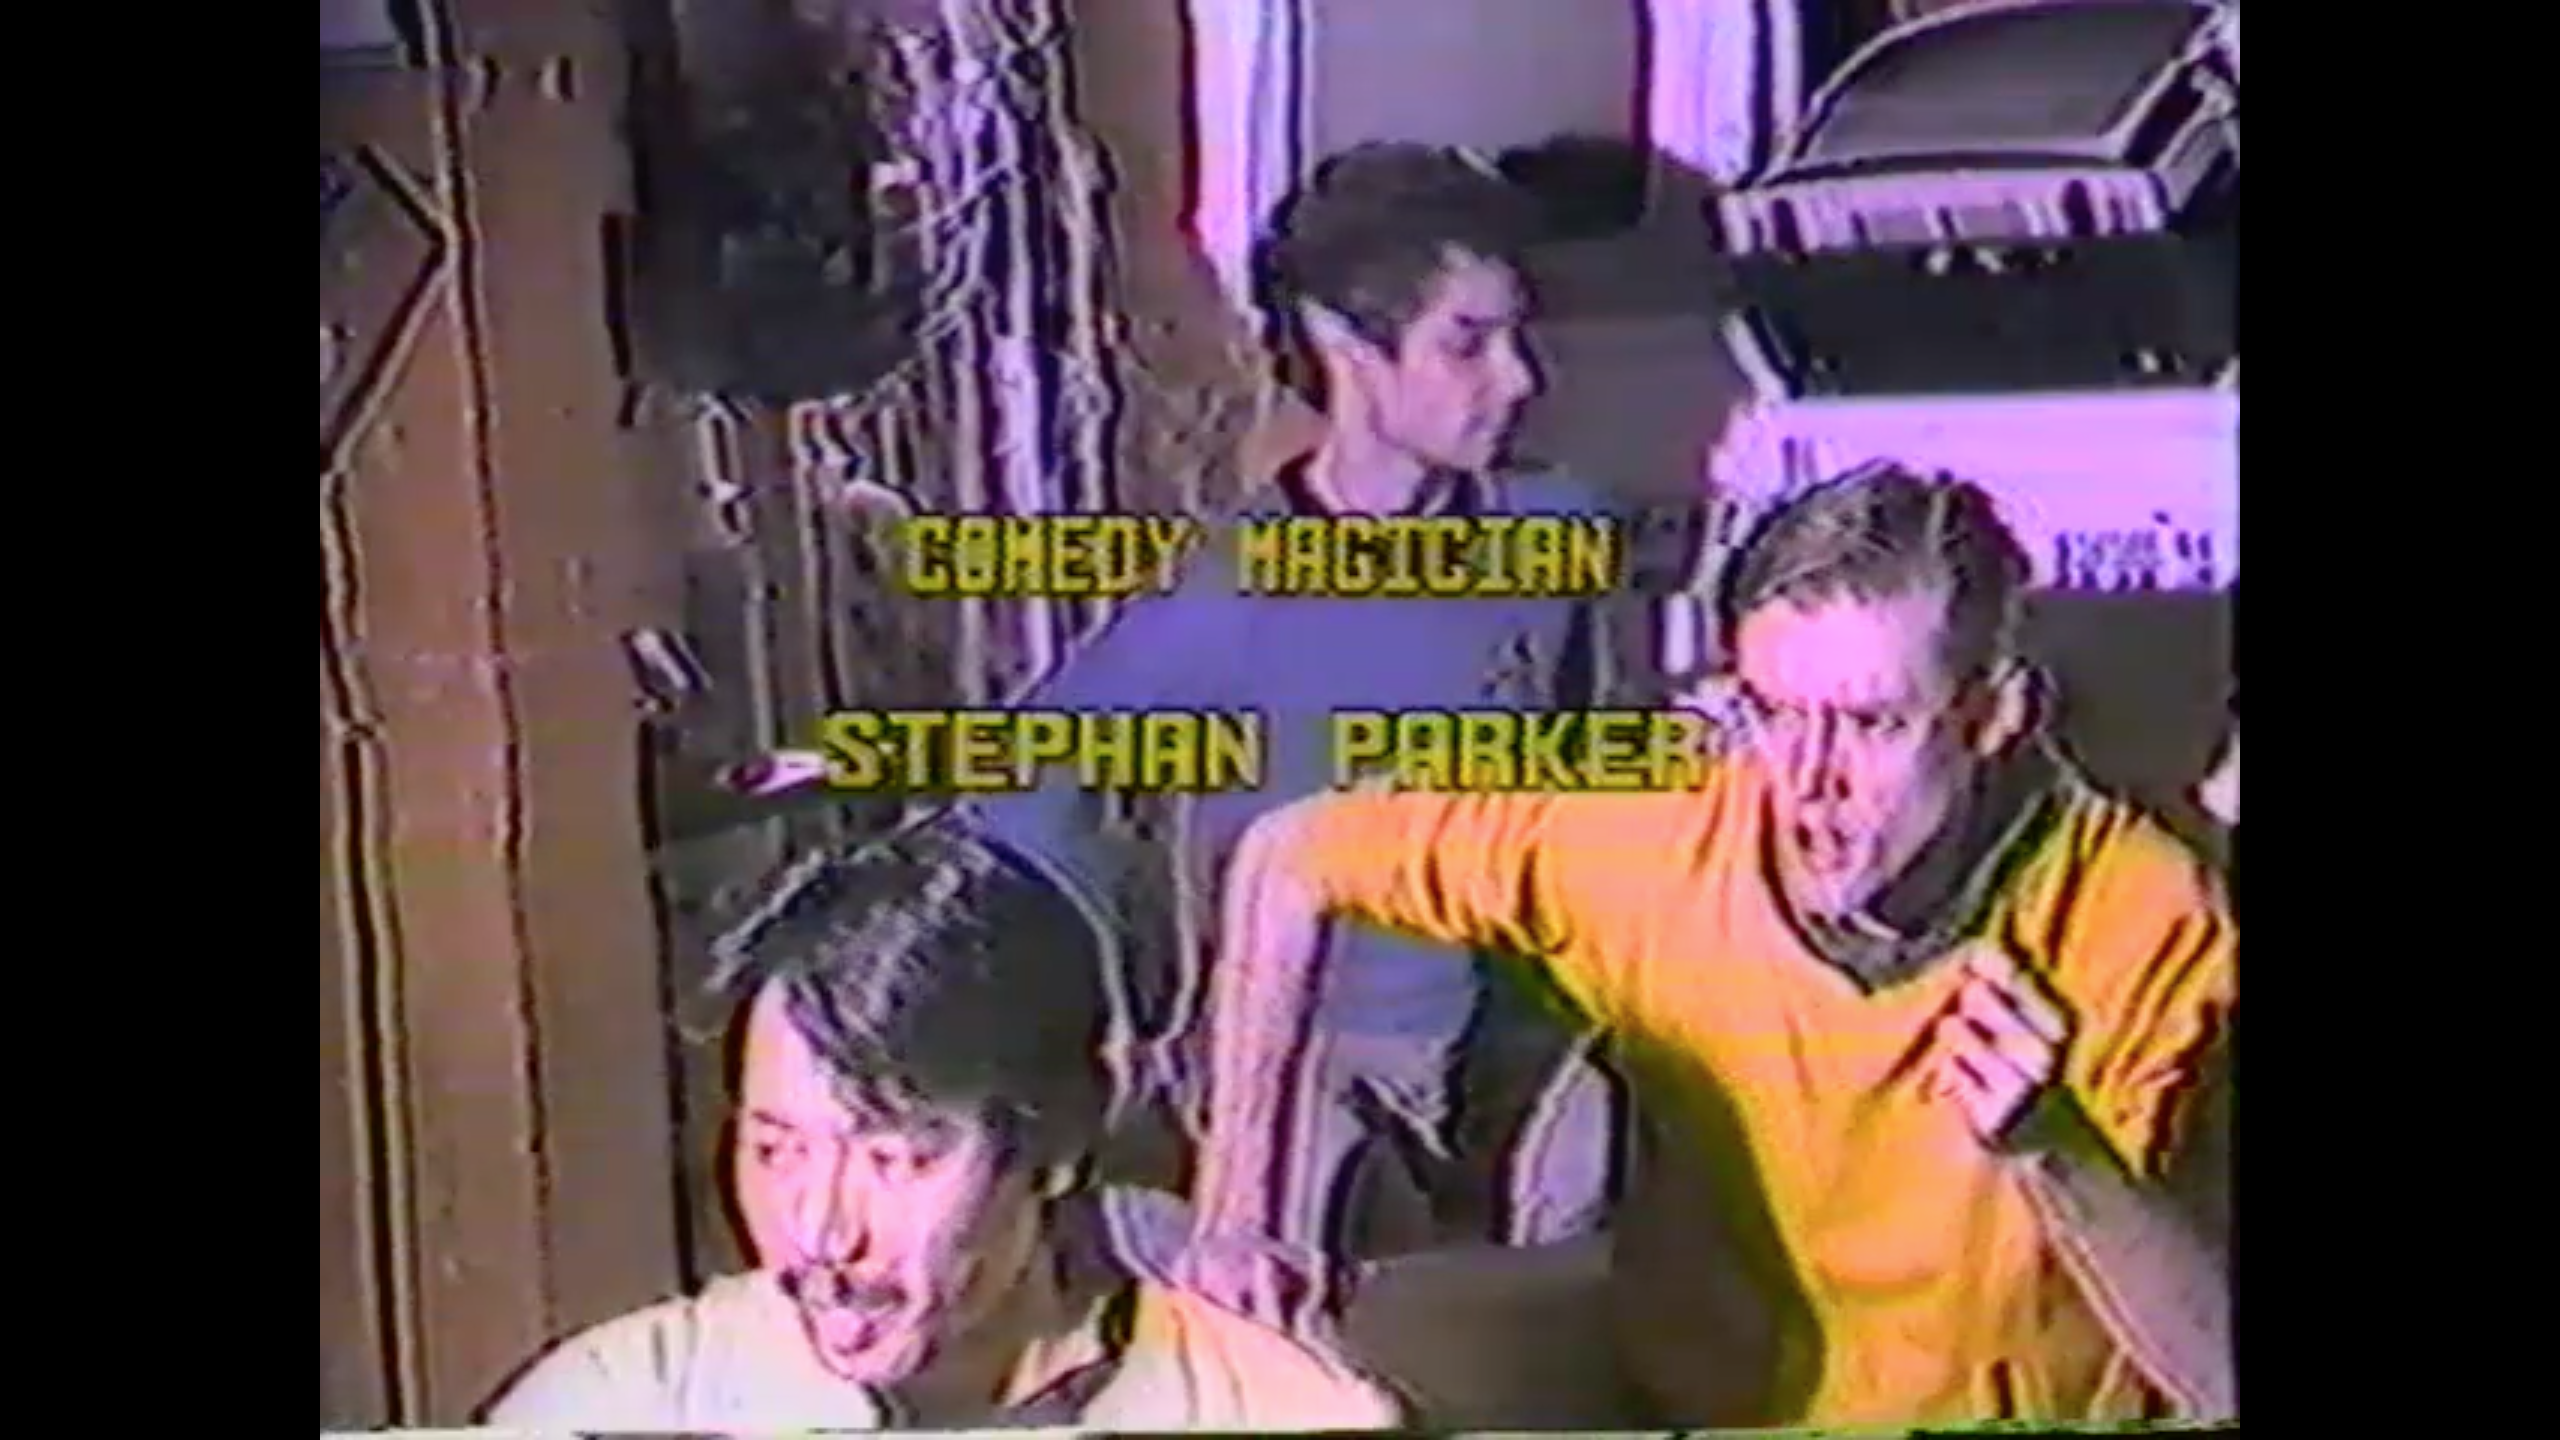 Screen shot of credits showing text "Comedy Magician Stephan Parker" over a photo of The Very Famous Friday Club Players in character and costumed as Star Trek's Sulu, Spock, and Captain Kirk